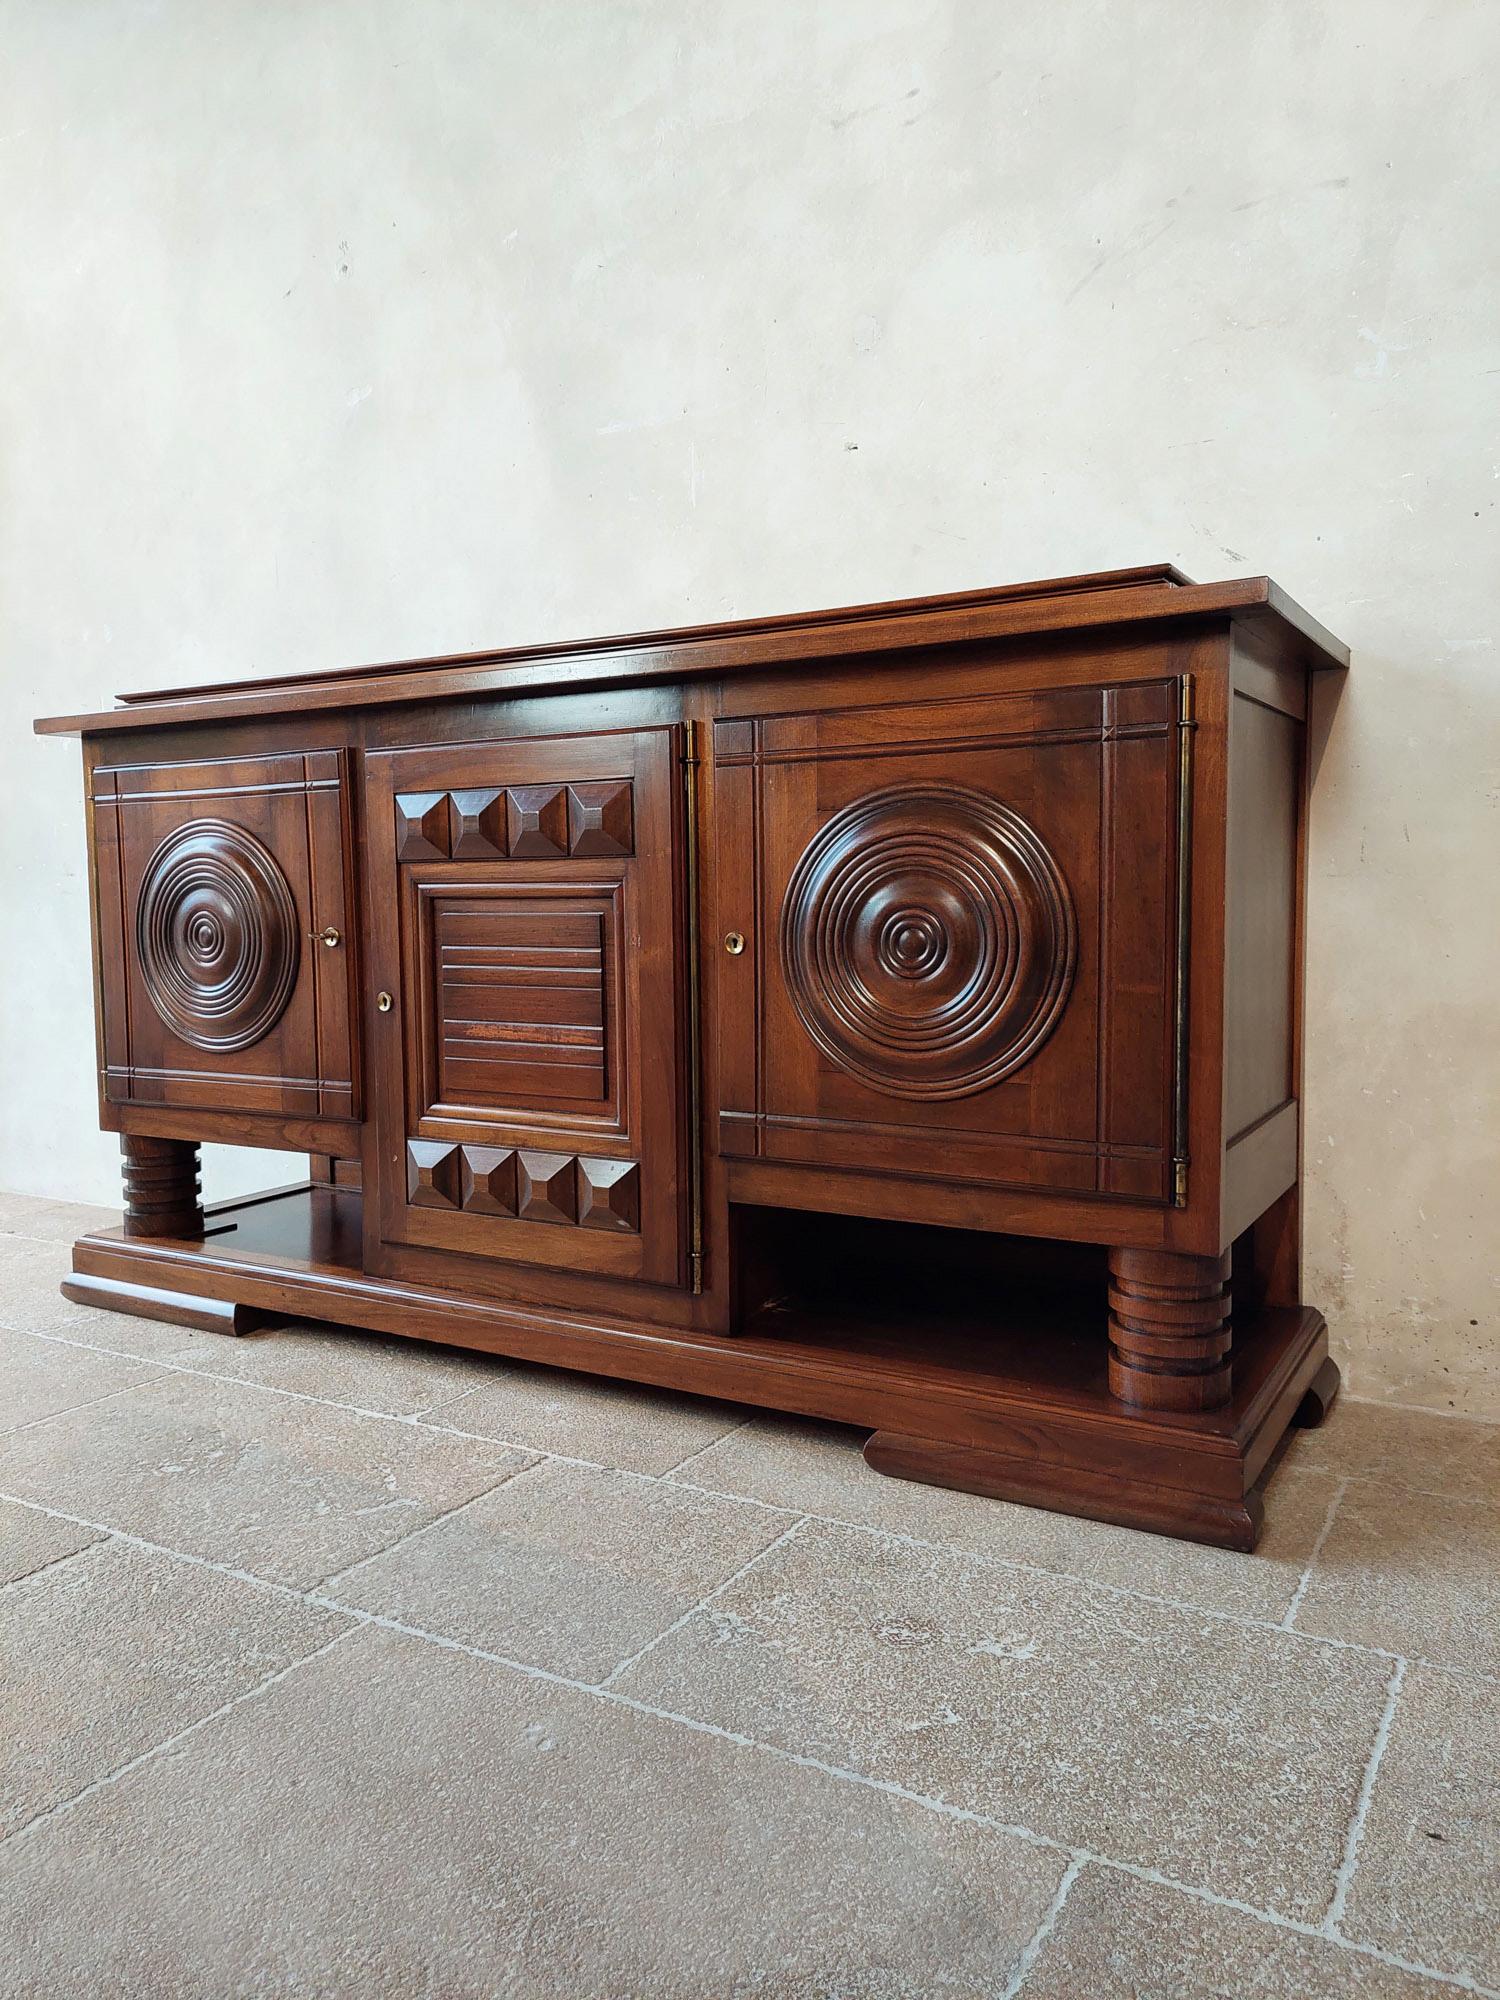 French Walnut Sideboard by Charles Dudouyt in Brown with a Polished Finish, 1940s For Sale